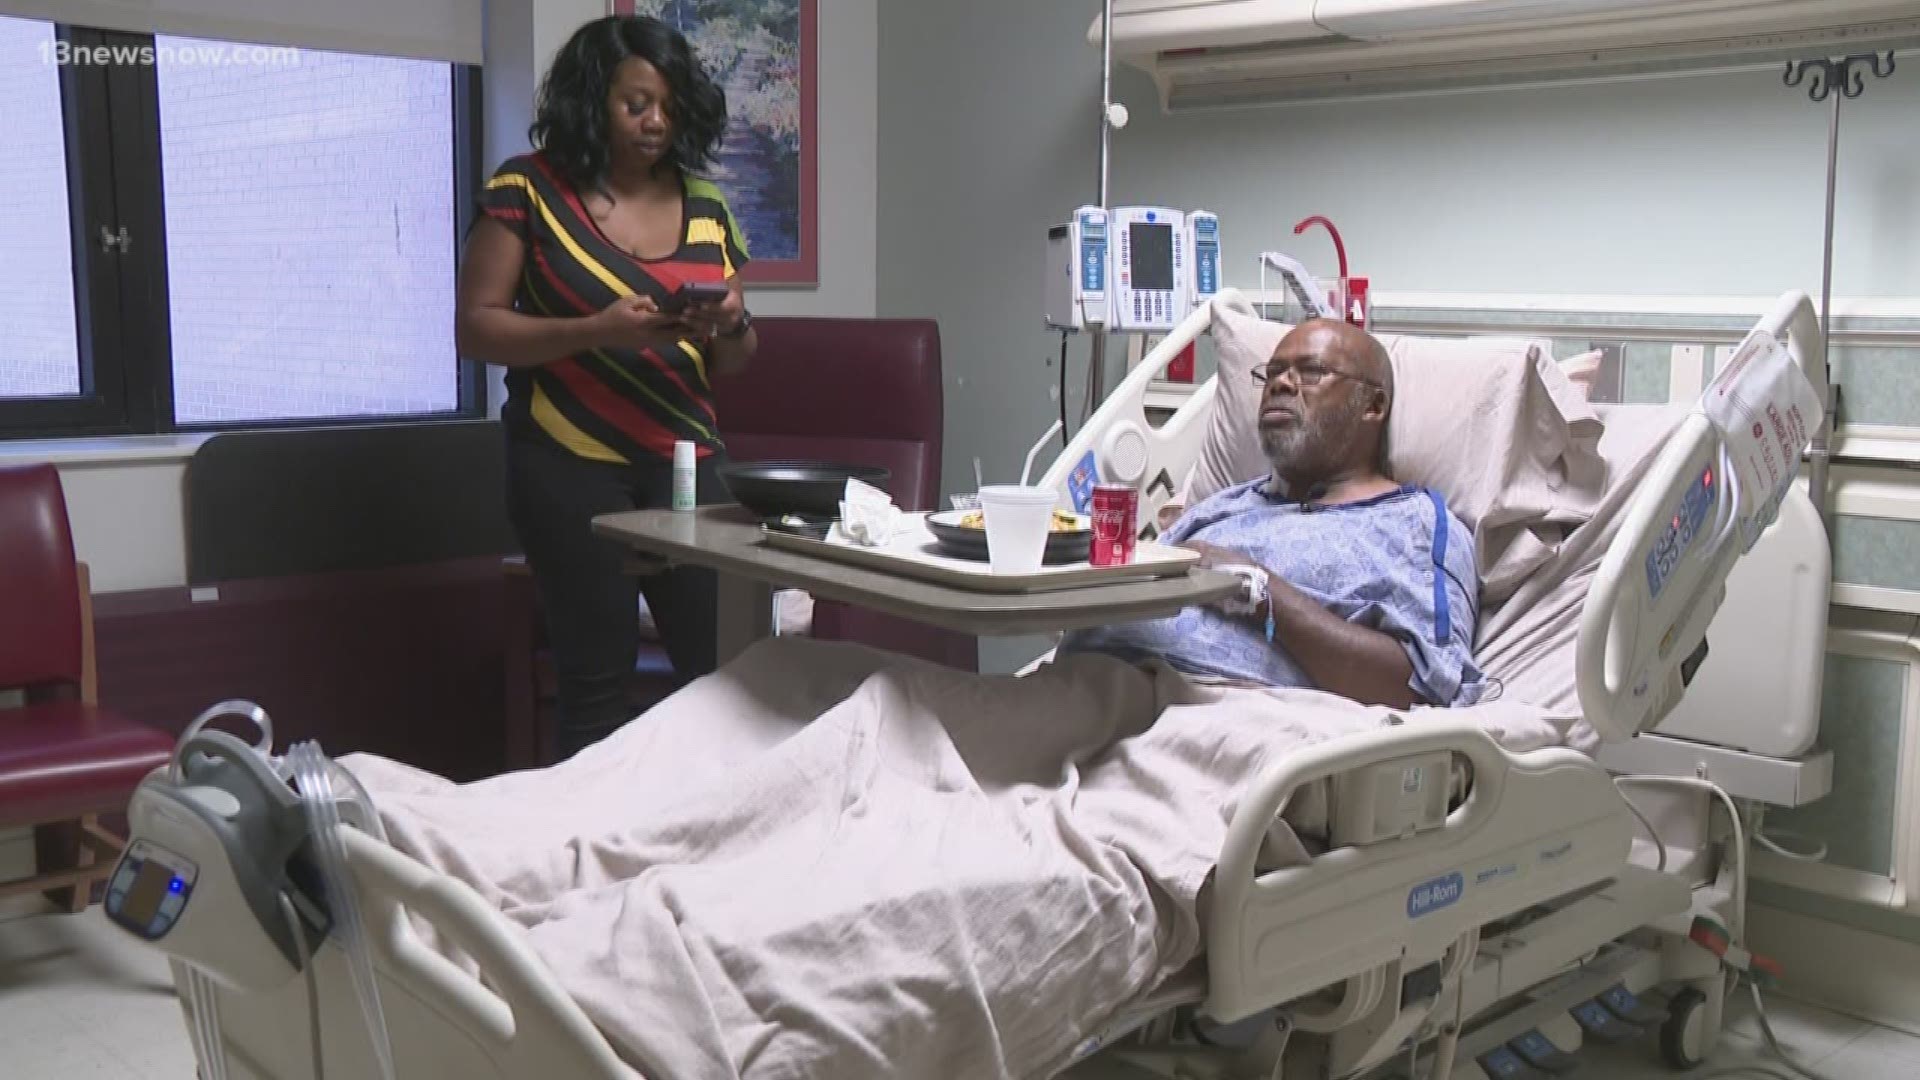 For five years, Reginald L. Jones was waiting for a kidney and last week, he finally got one. The news came just in time to walk his daughter down the aisle.